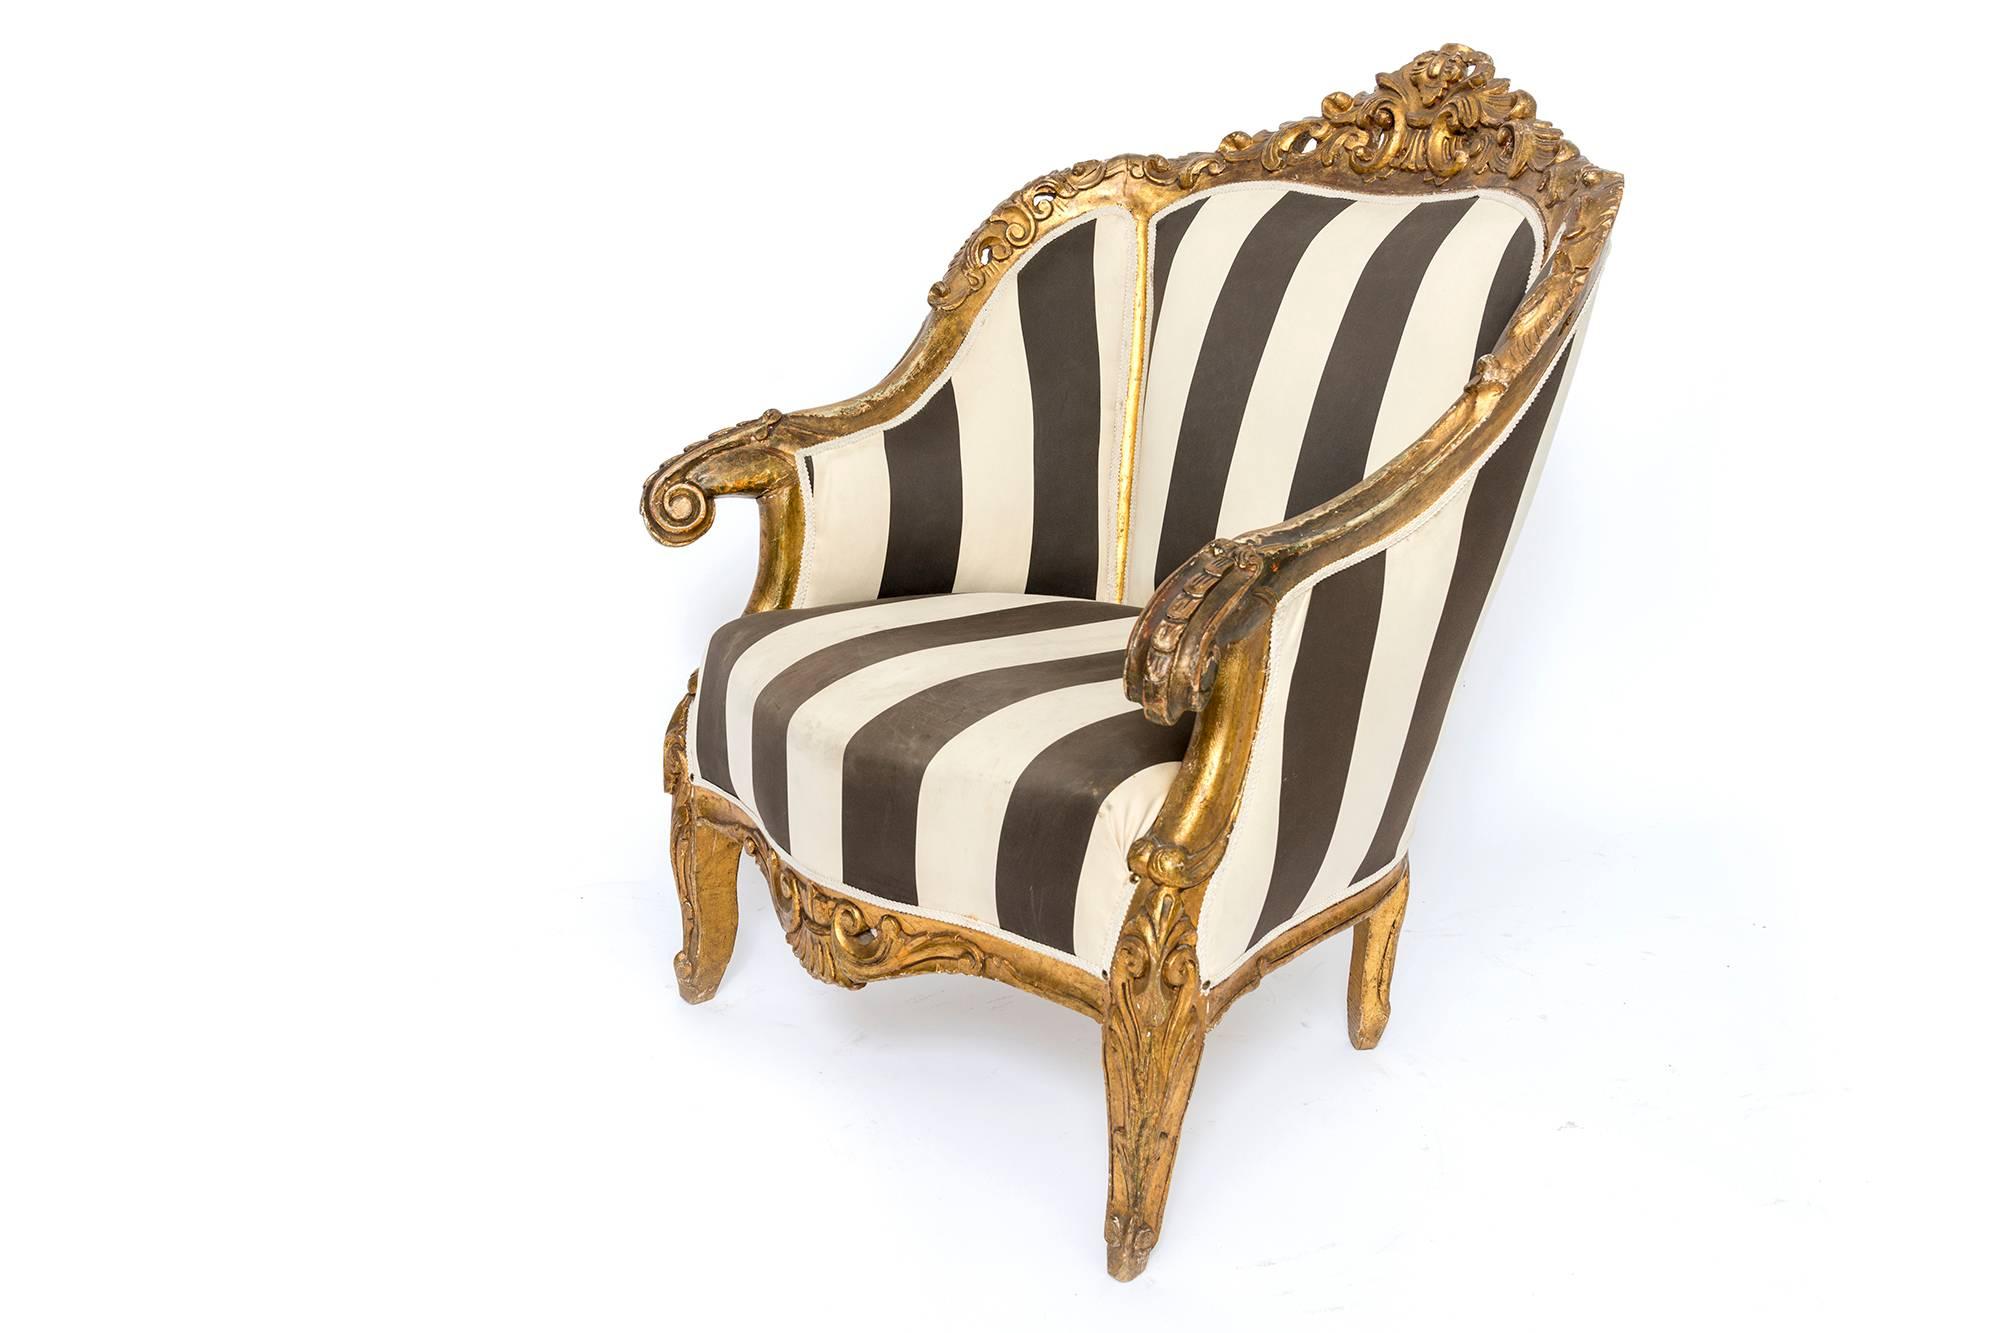 From France, 1890. Two over-sized and extremely caressing fauteuils with gilt wooden ornate work. An incredible accent pair for your grand salon or living room, library and more.